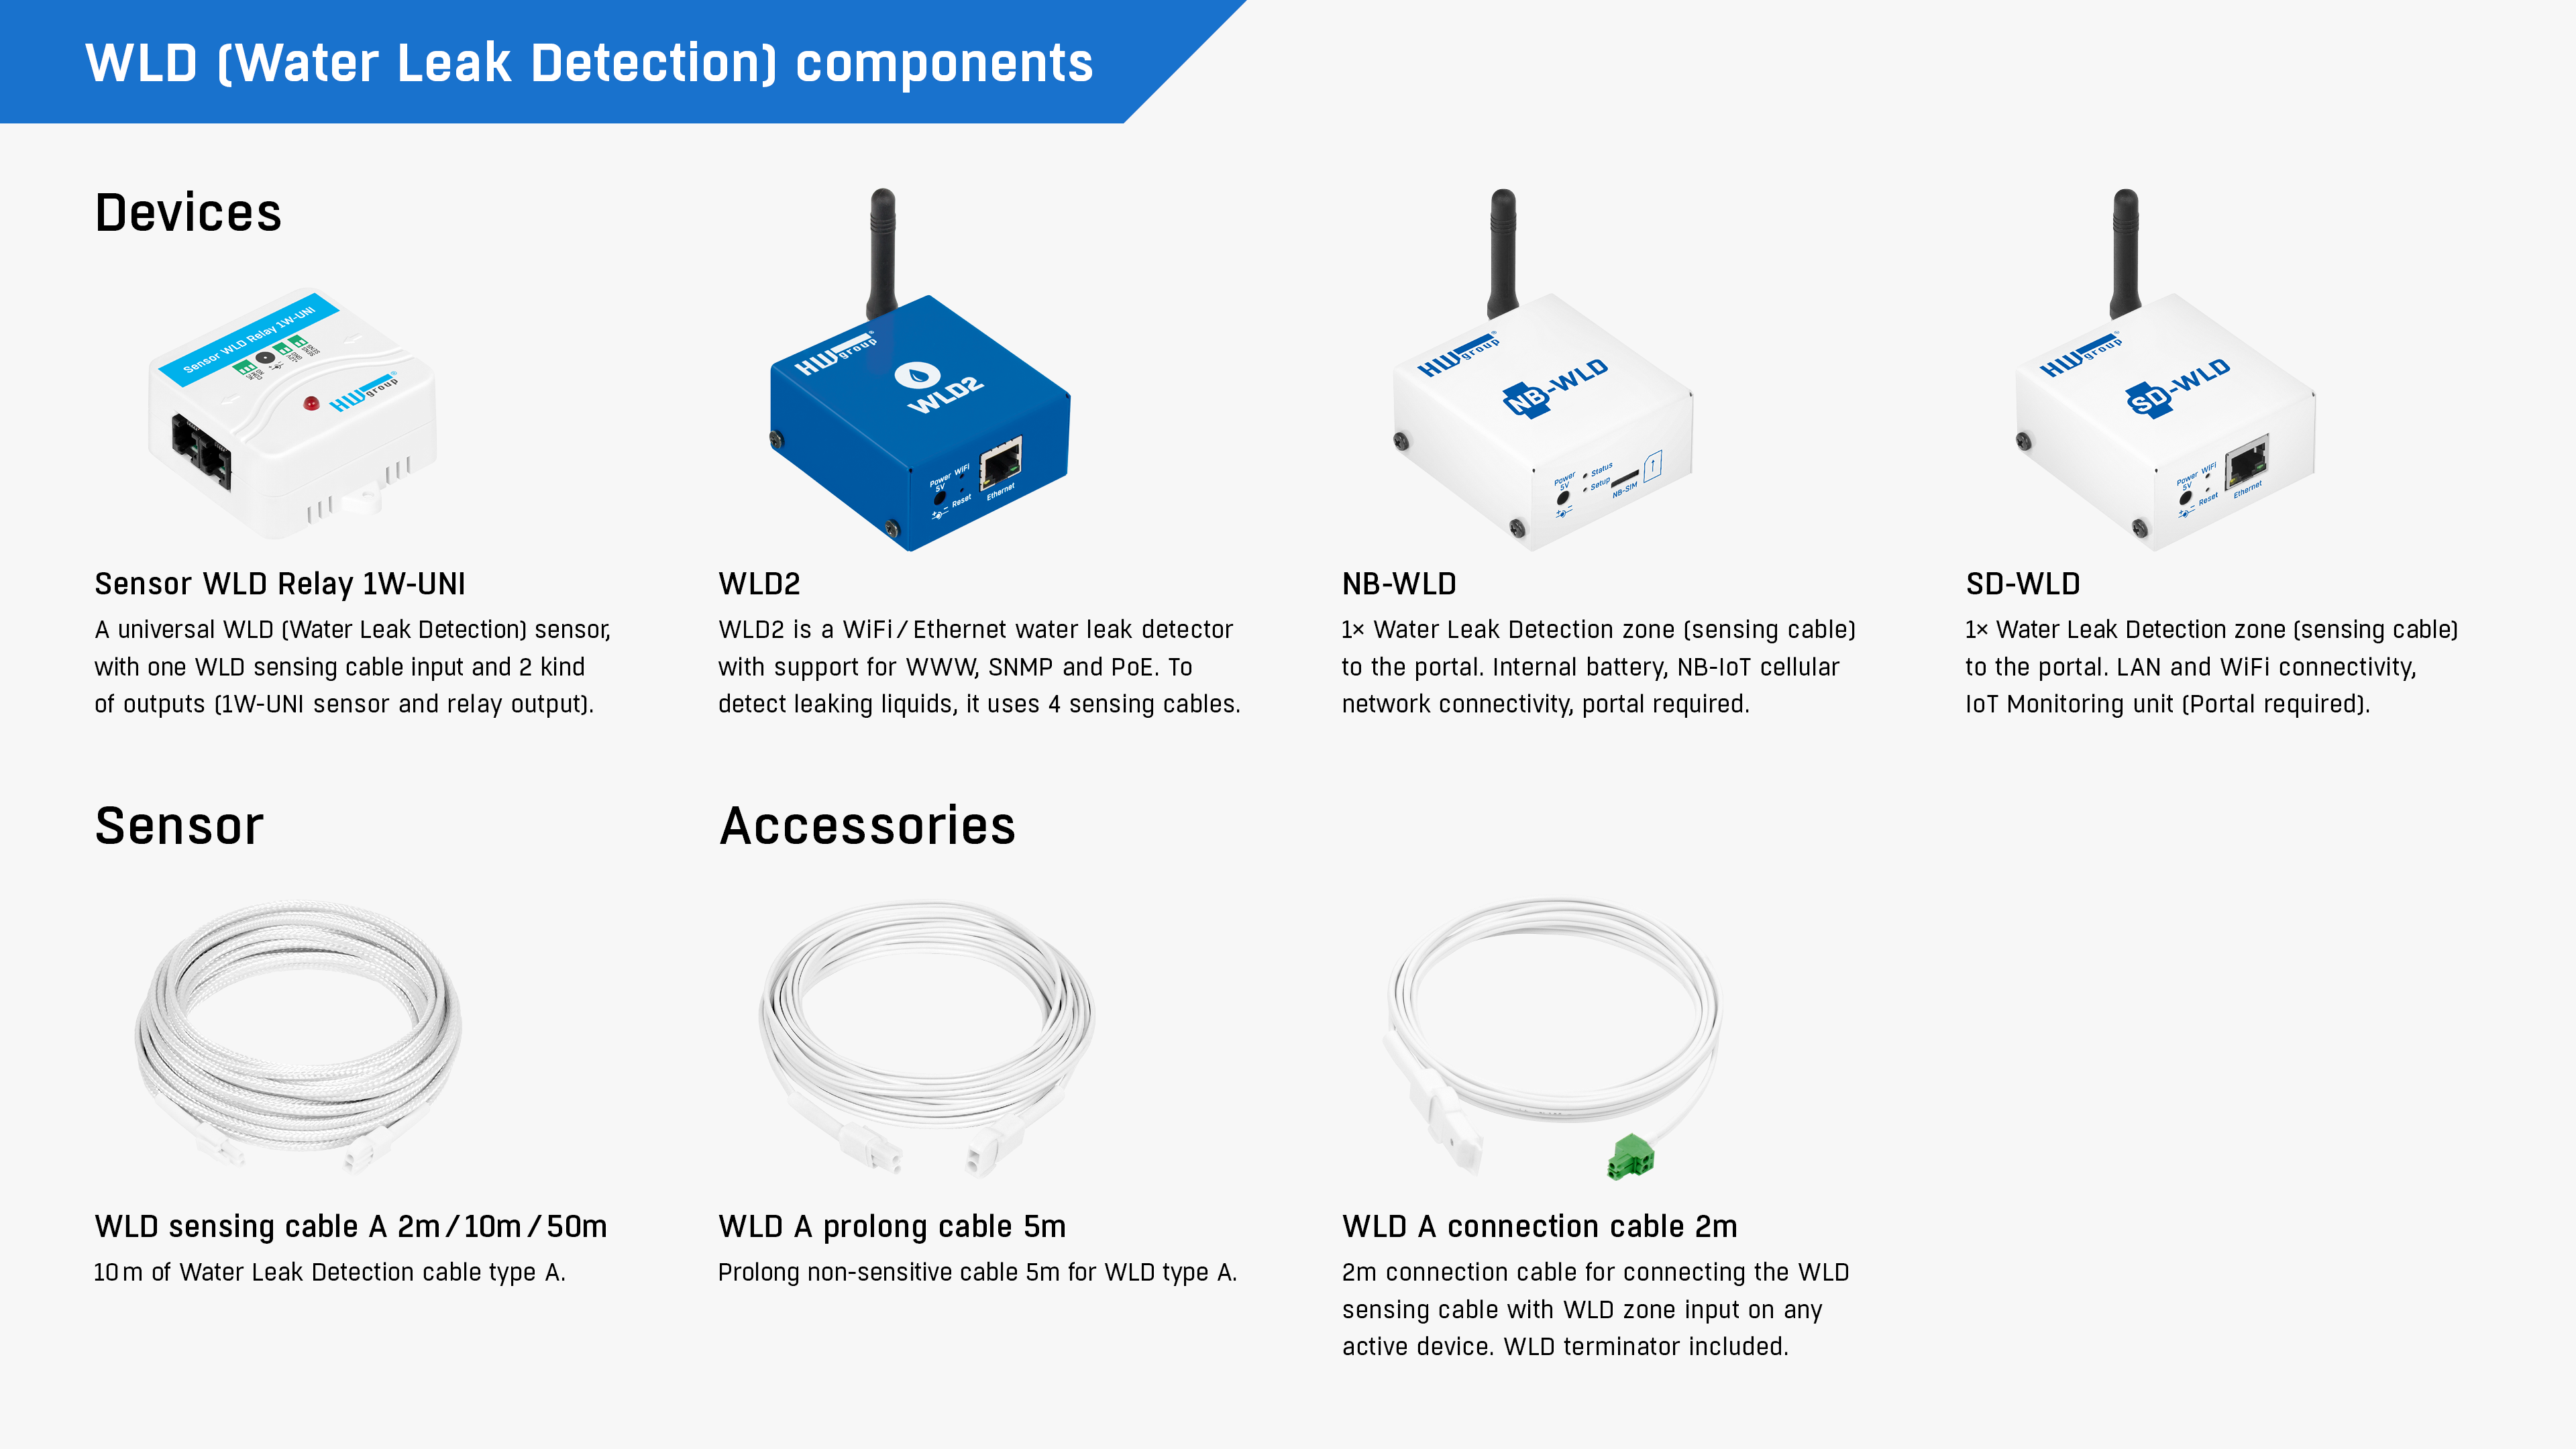 Water Leak Detection system components